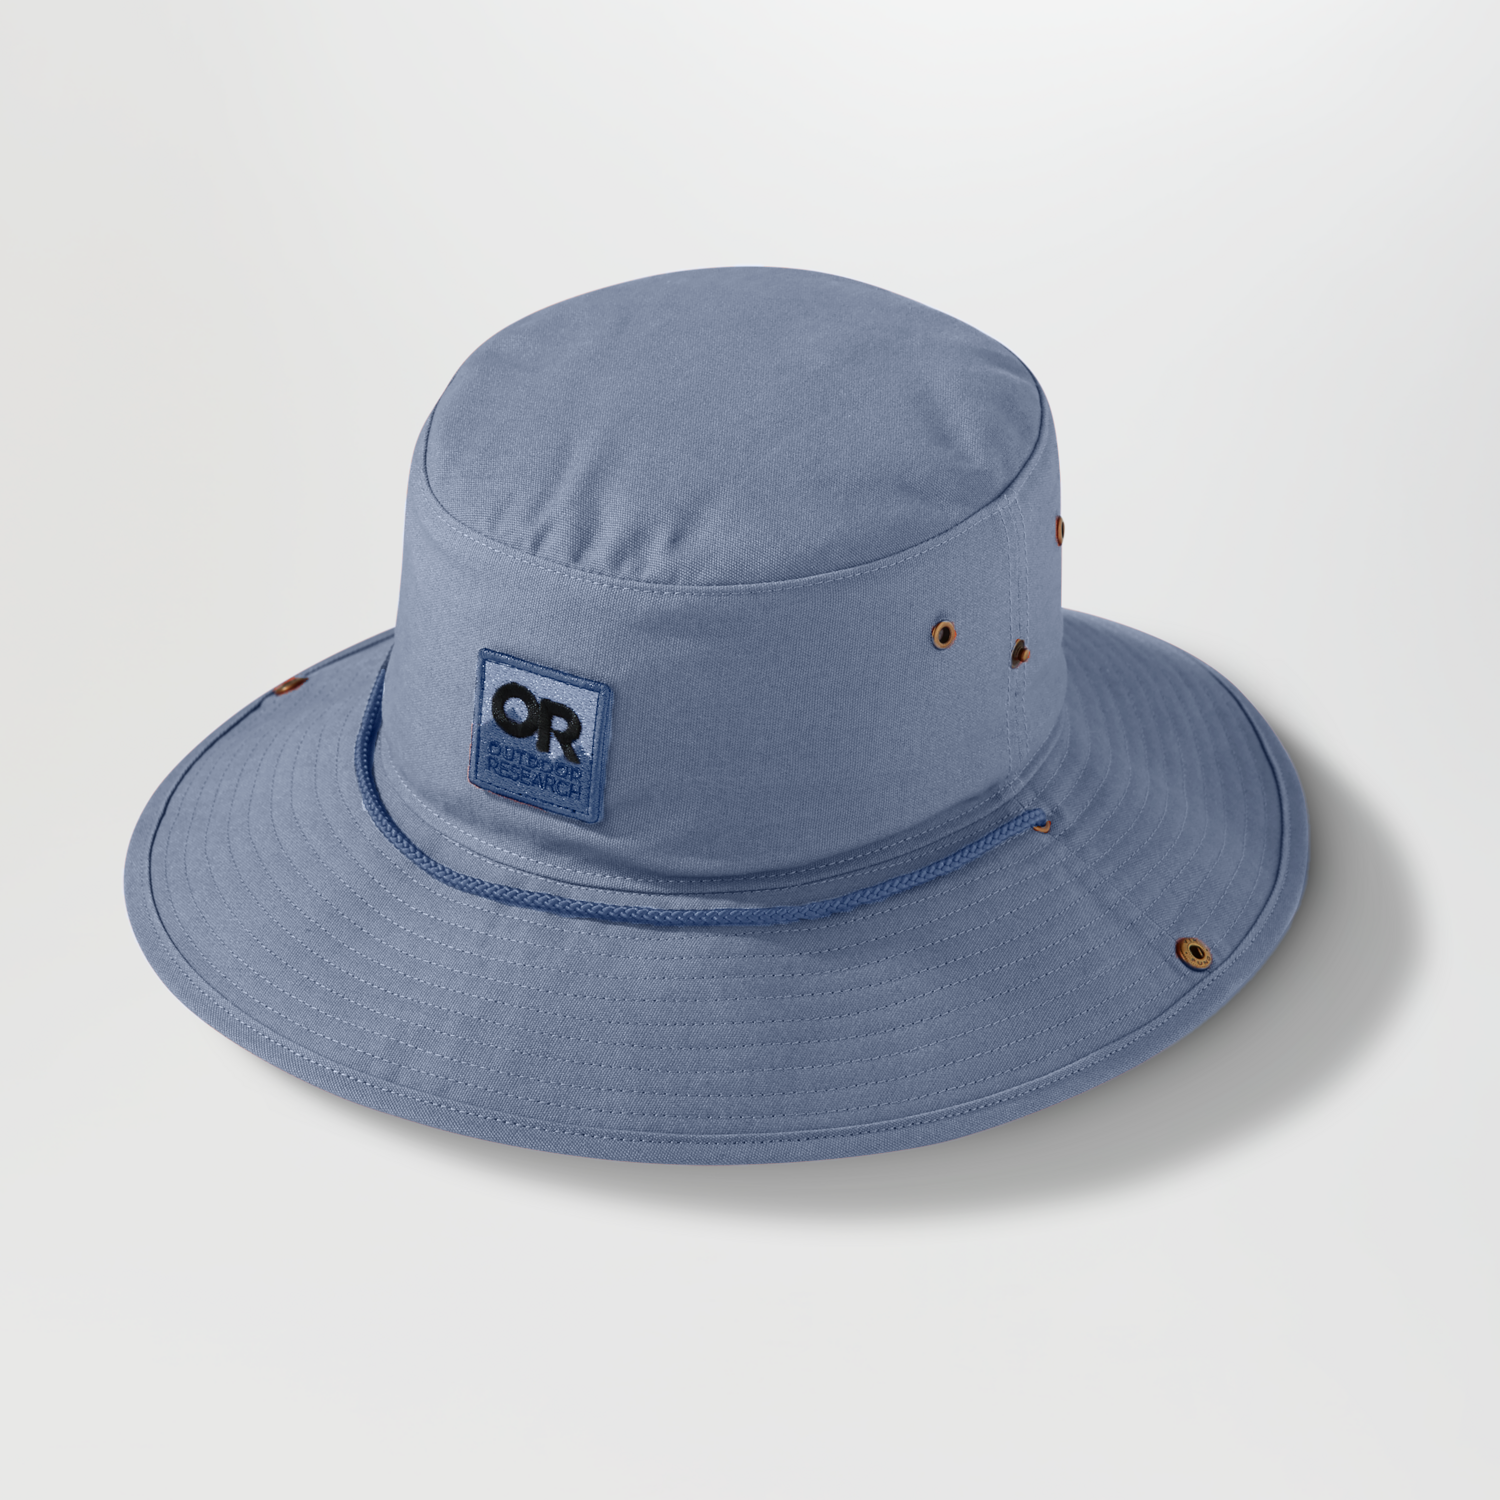 Outdoor Research Moab Sun Hat - Galaxy, S/M